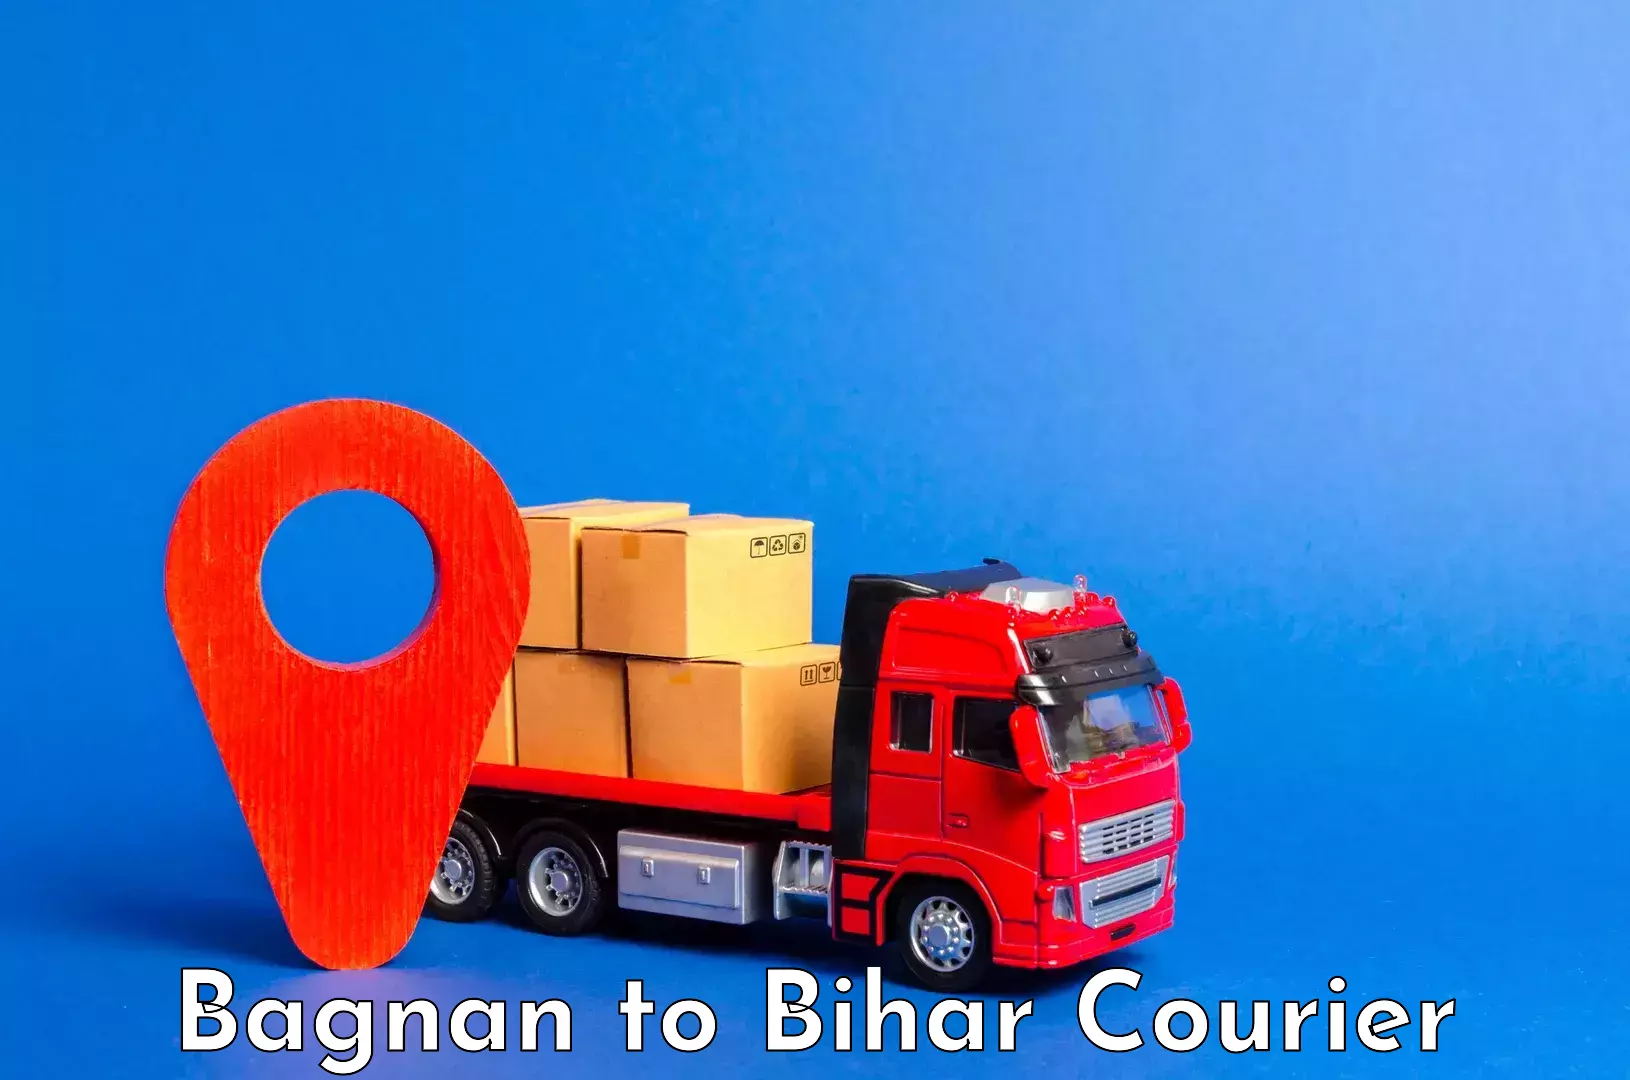 Baggage delivery technology Bagnan to Bhorey